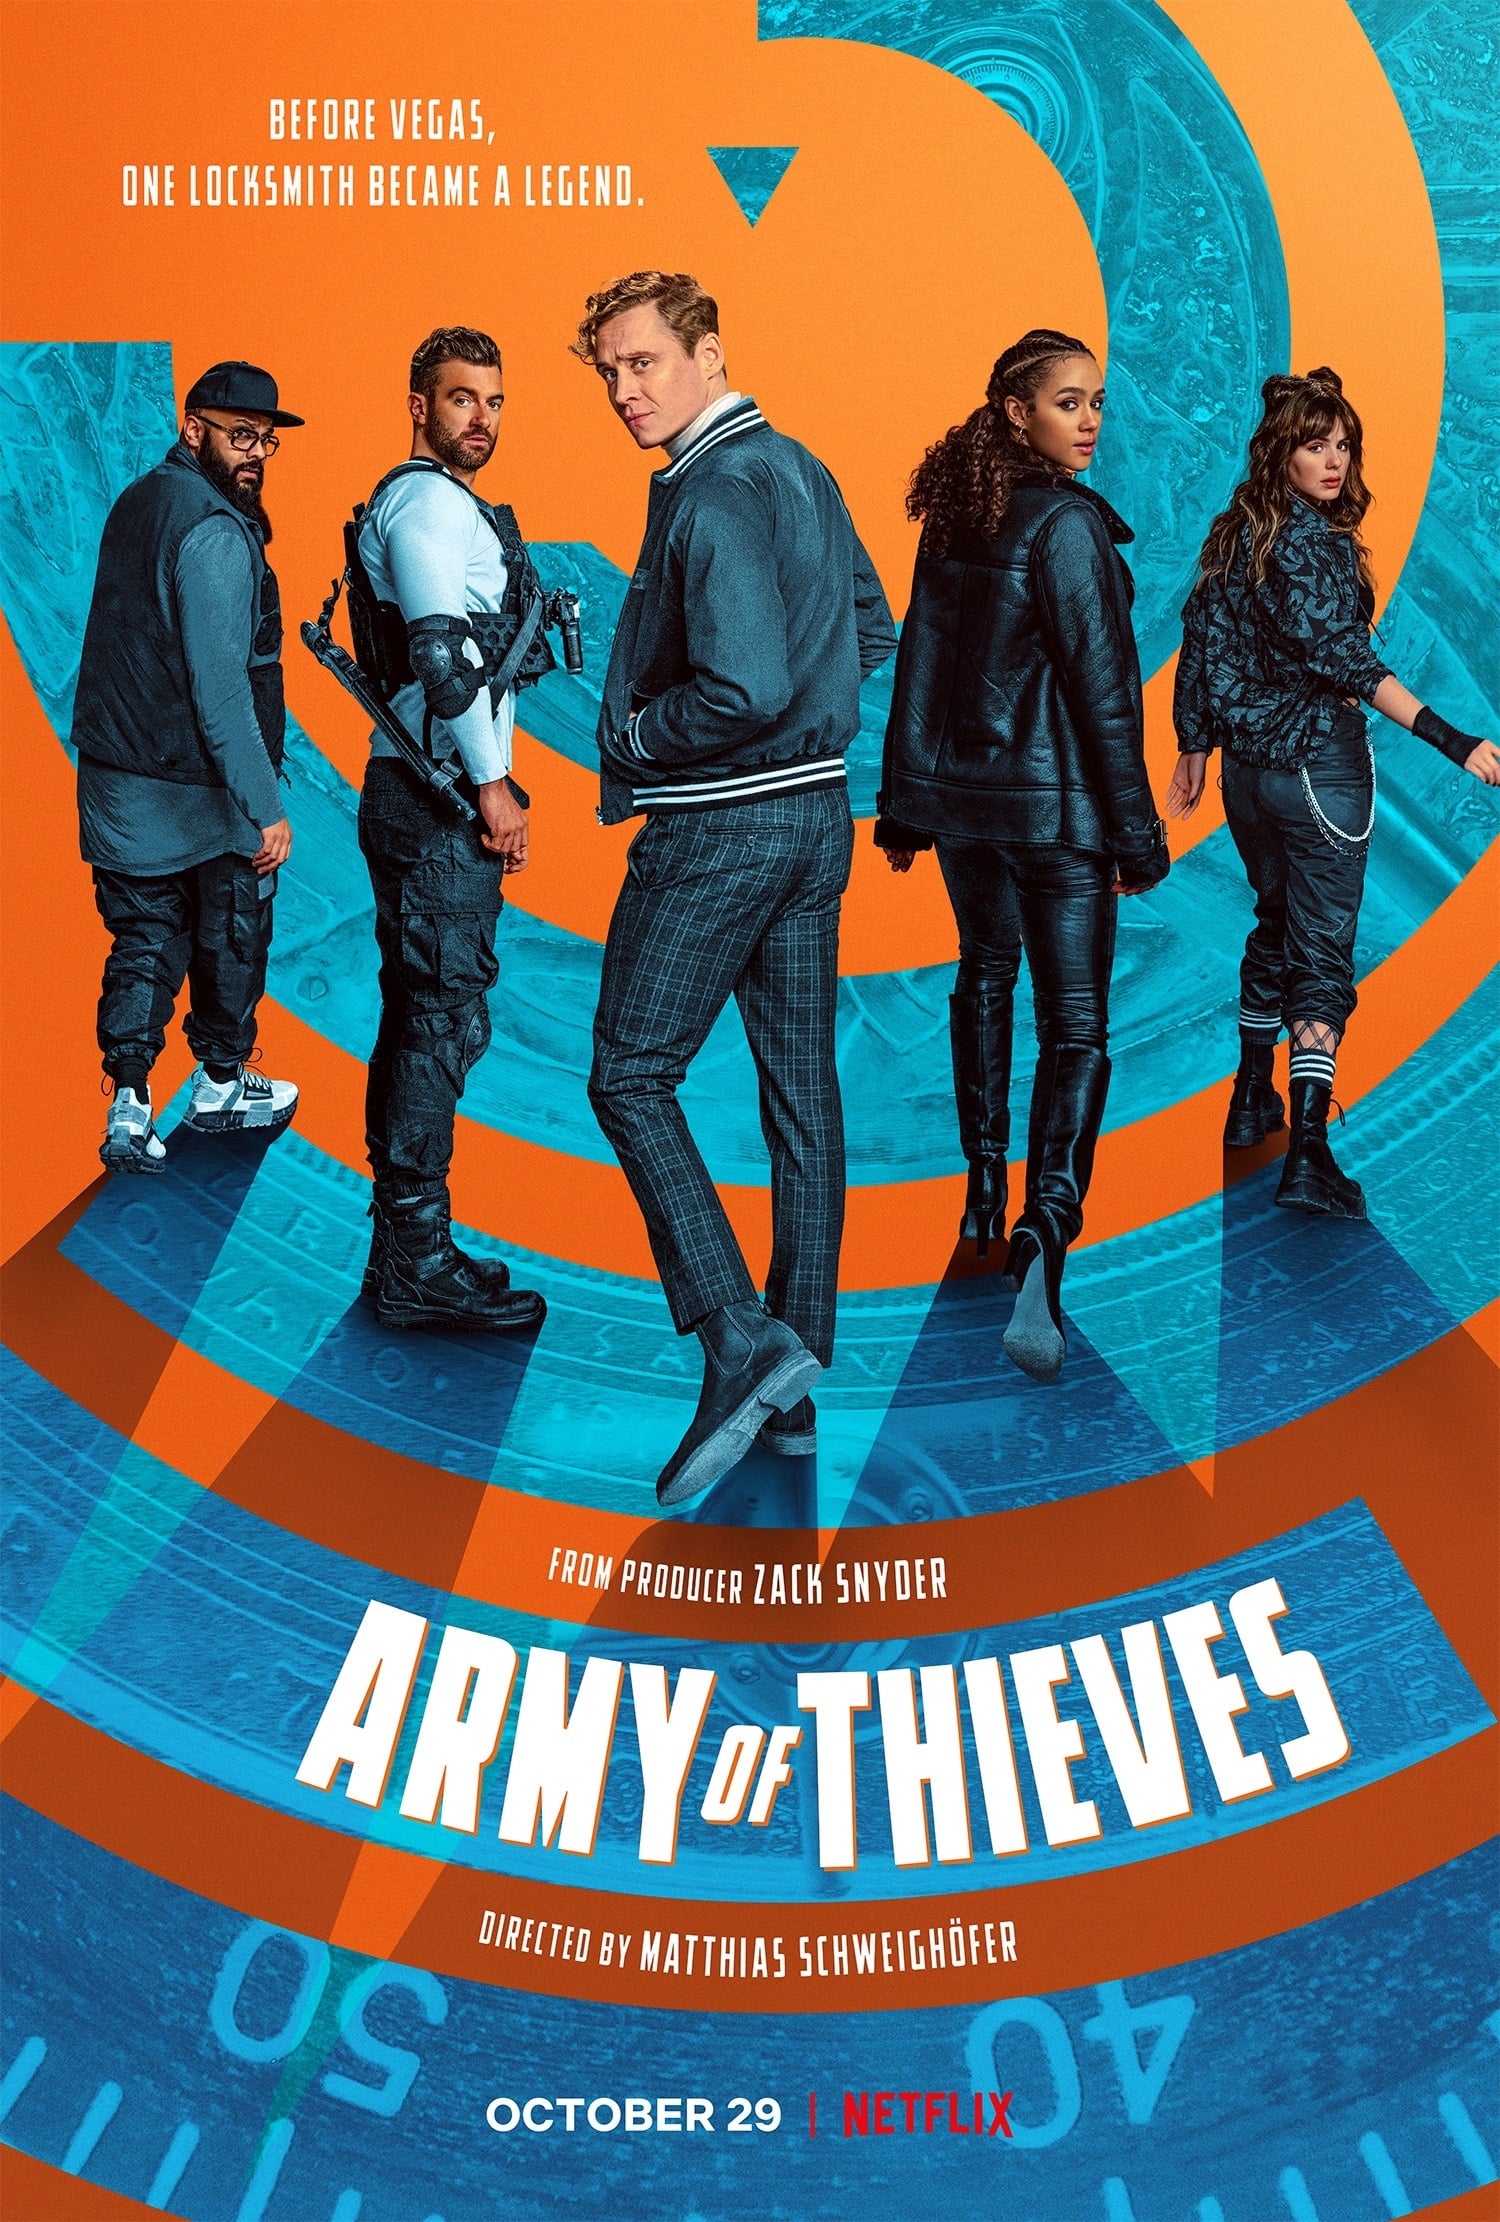 Is Army of Thieves on Netflix